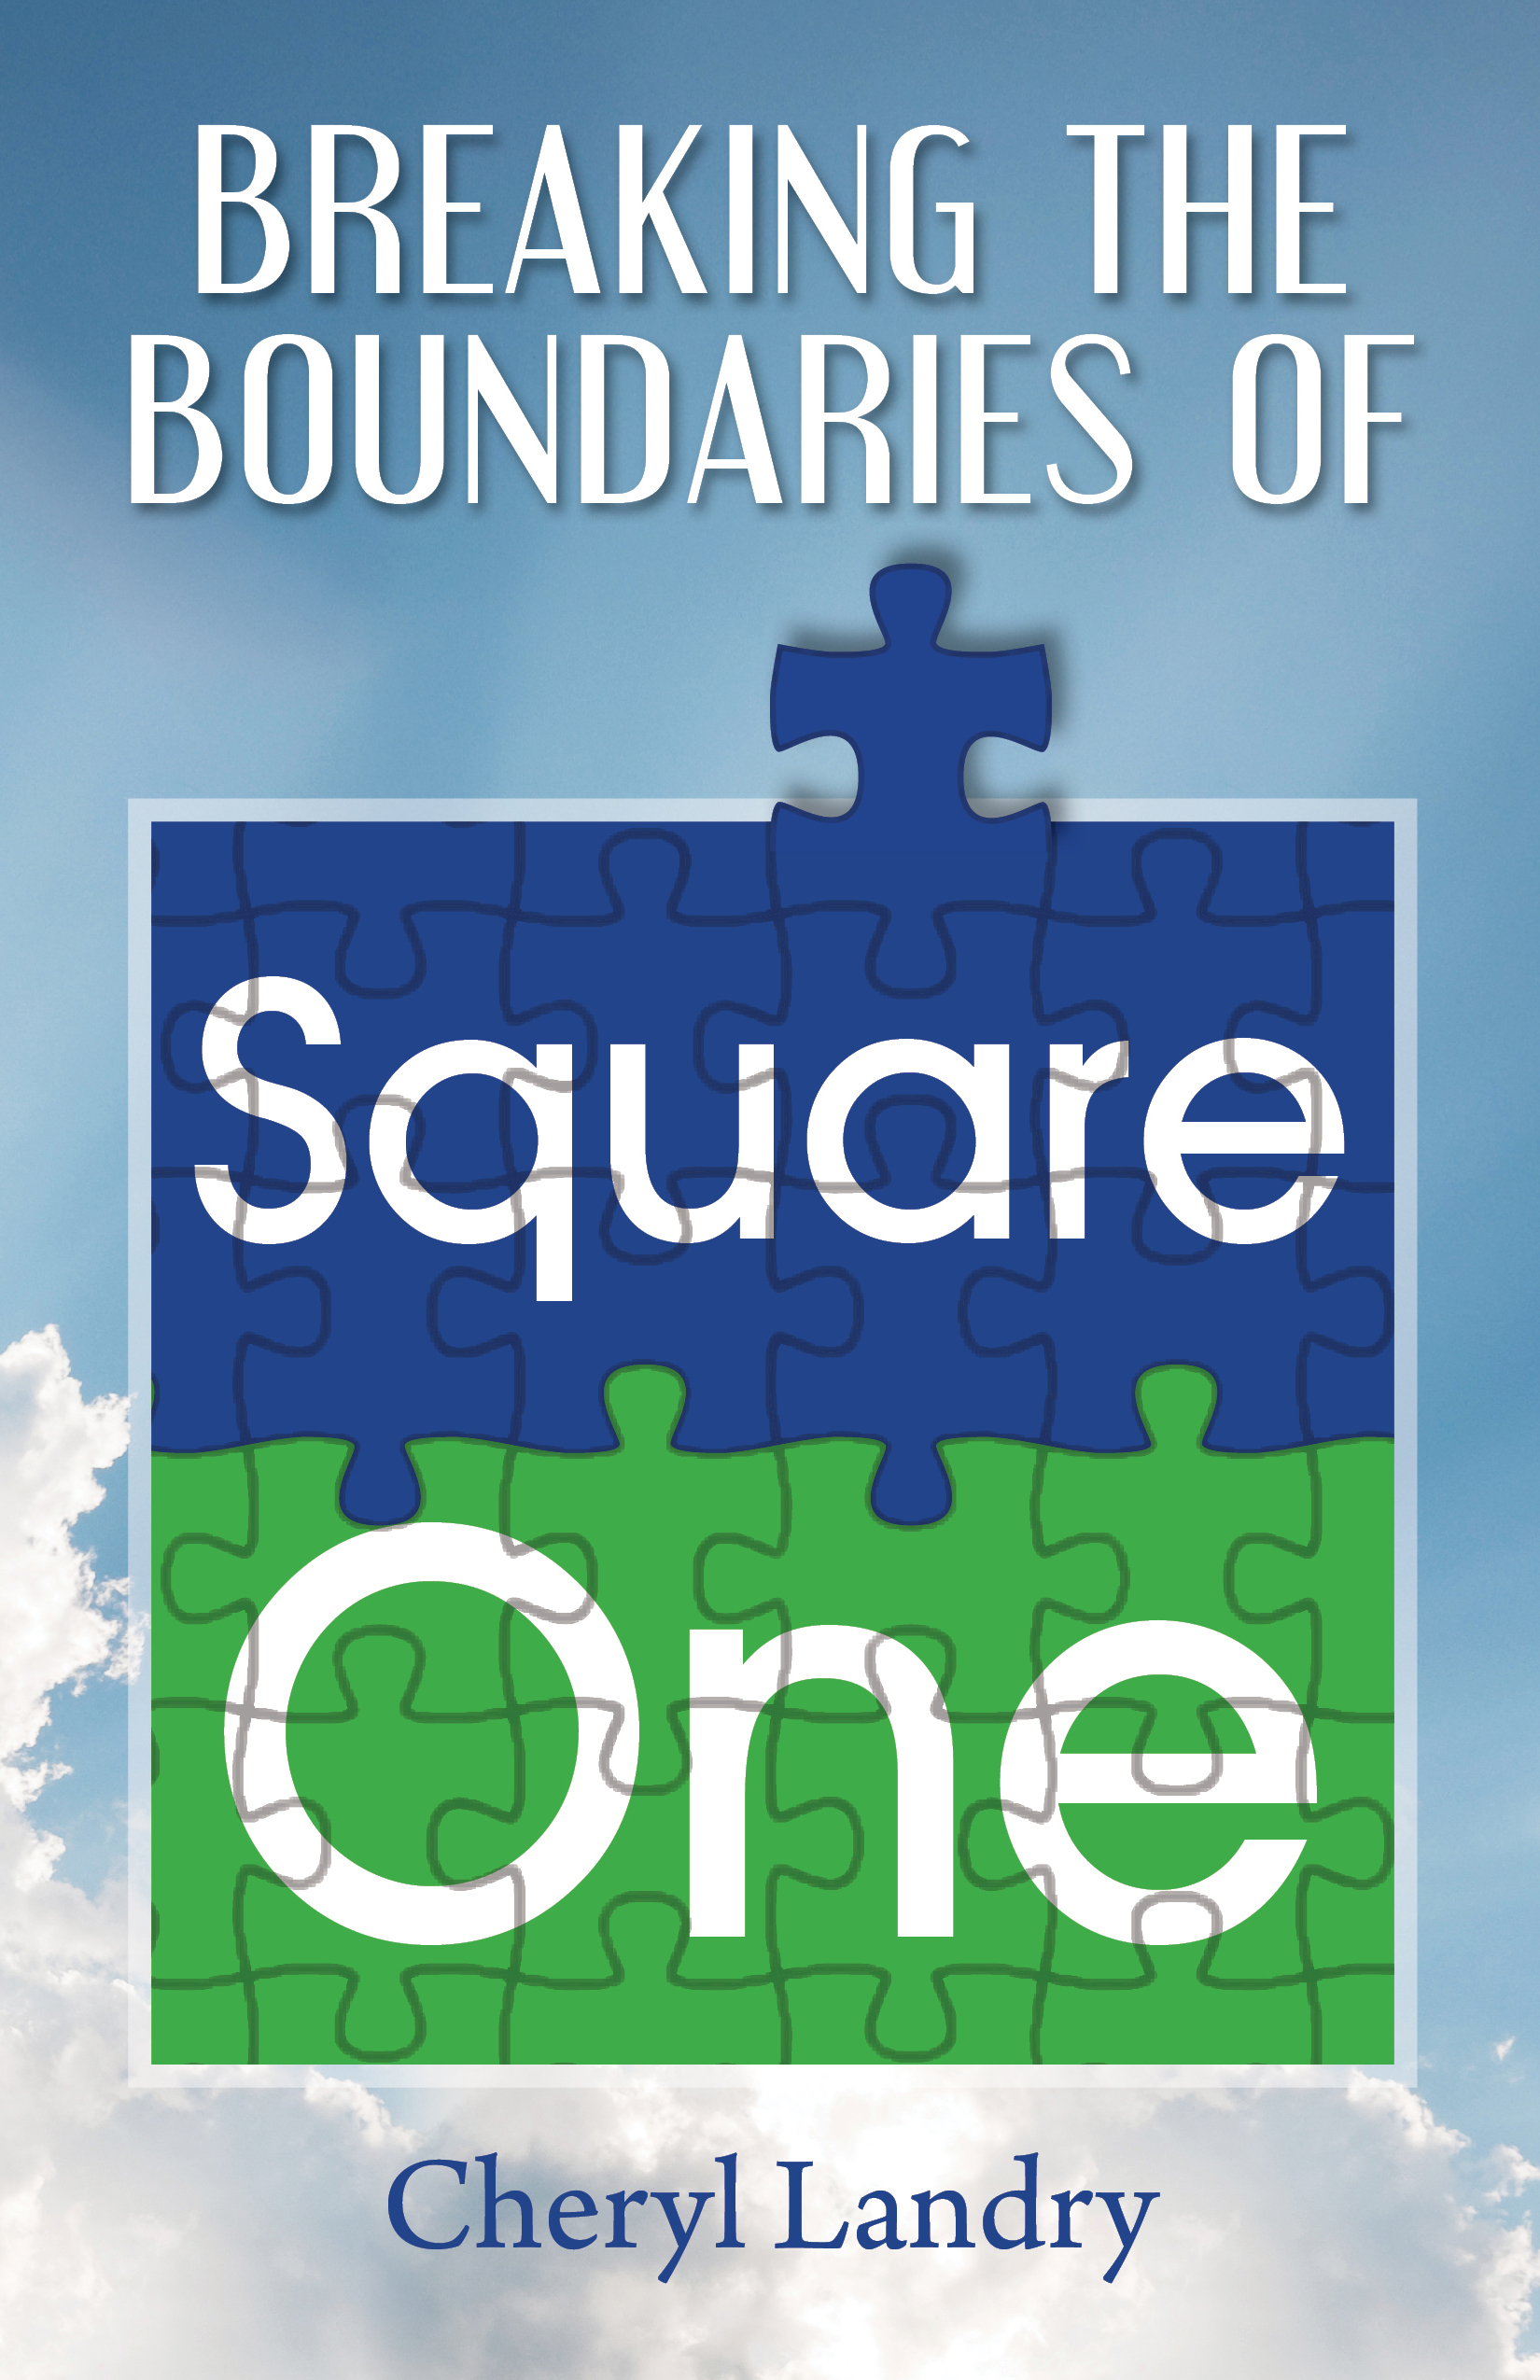 Breaking the Boundaries of Square One